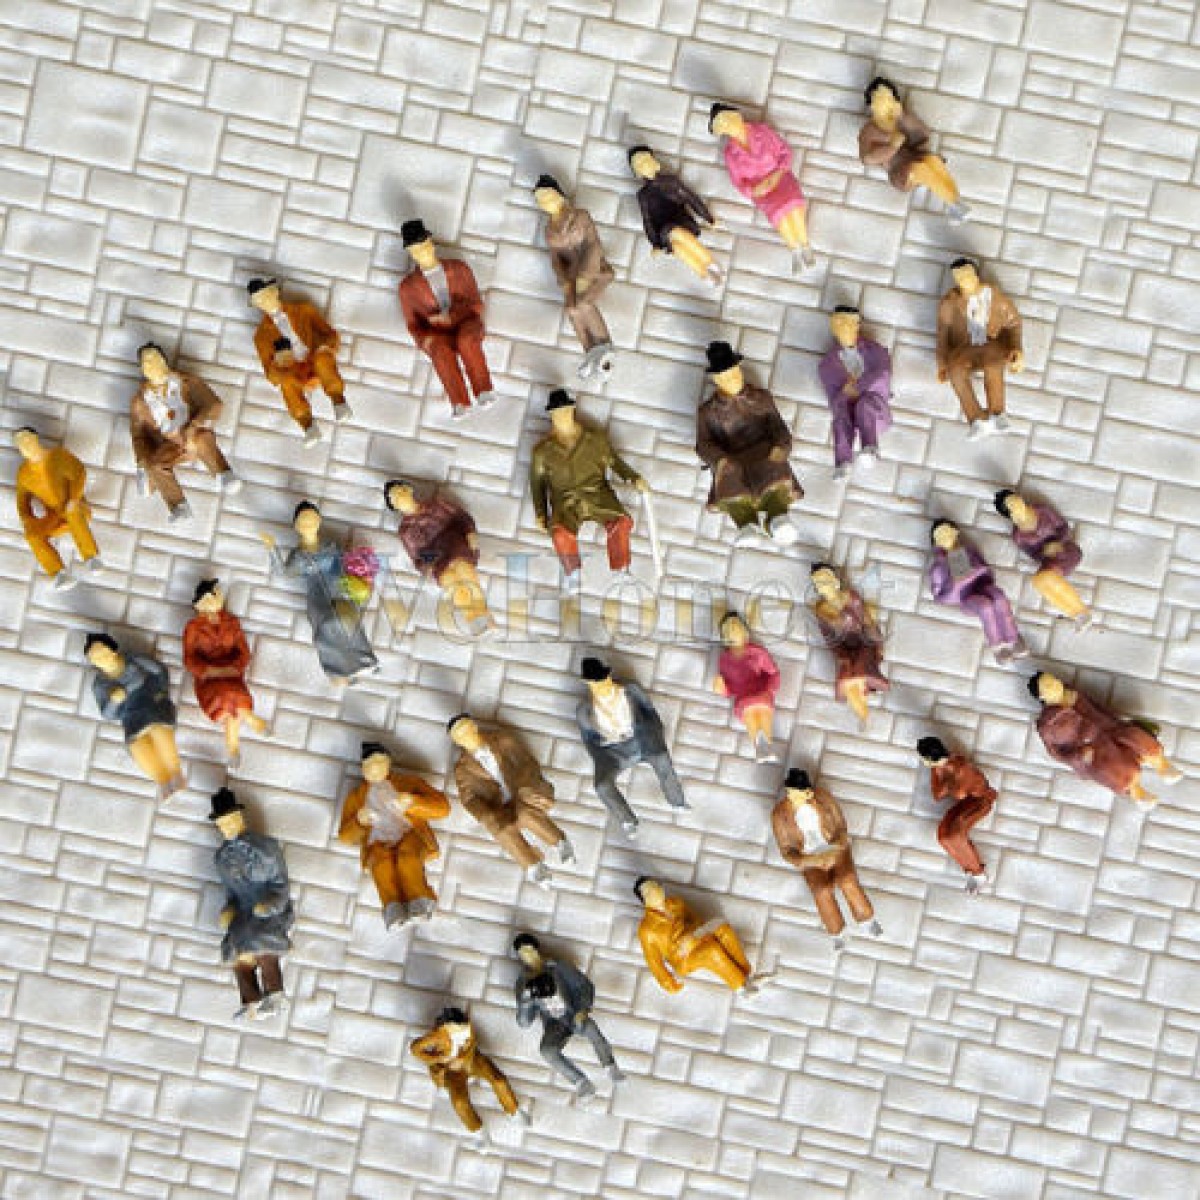 30 pcs HO scale ALL Seated People sitting figures Passengers 30 difr poses #B30P